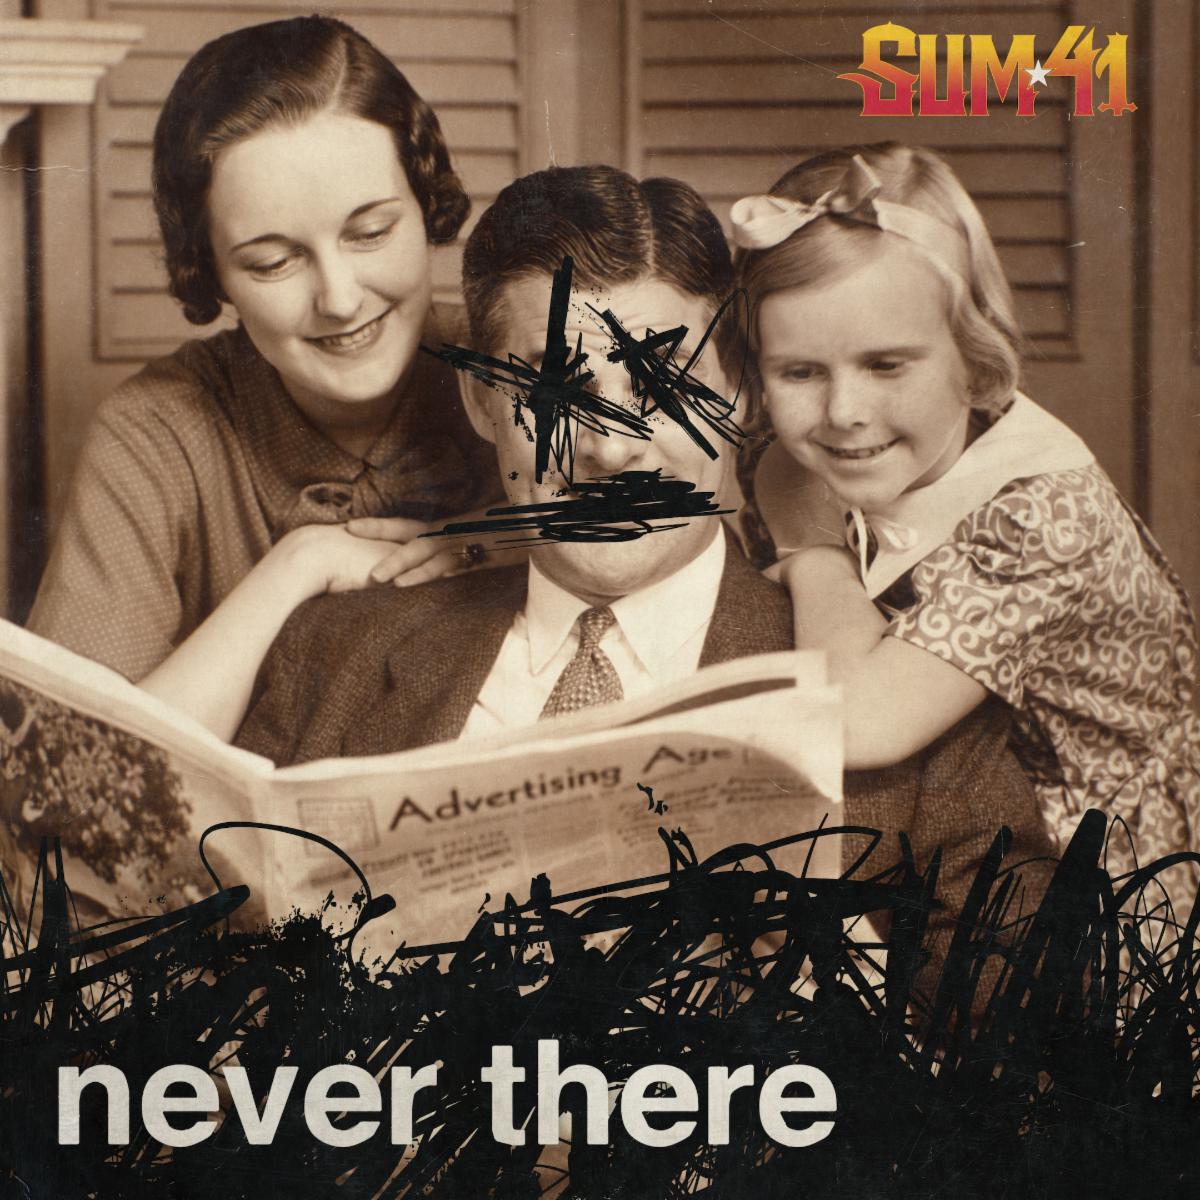 Sum 41's Single "Never There" Debuts in Top 40 on Active Rock Chart